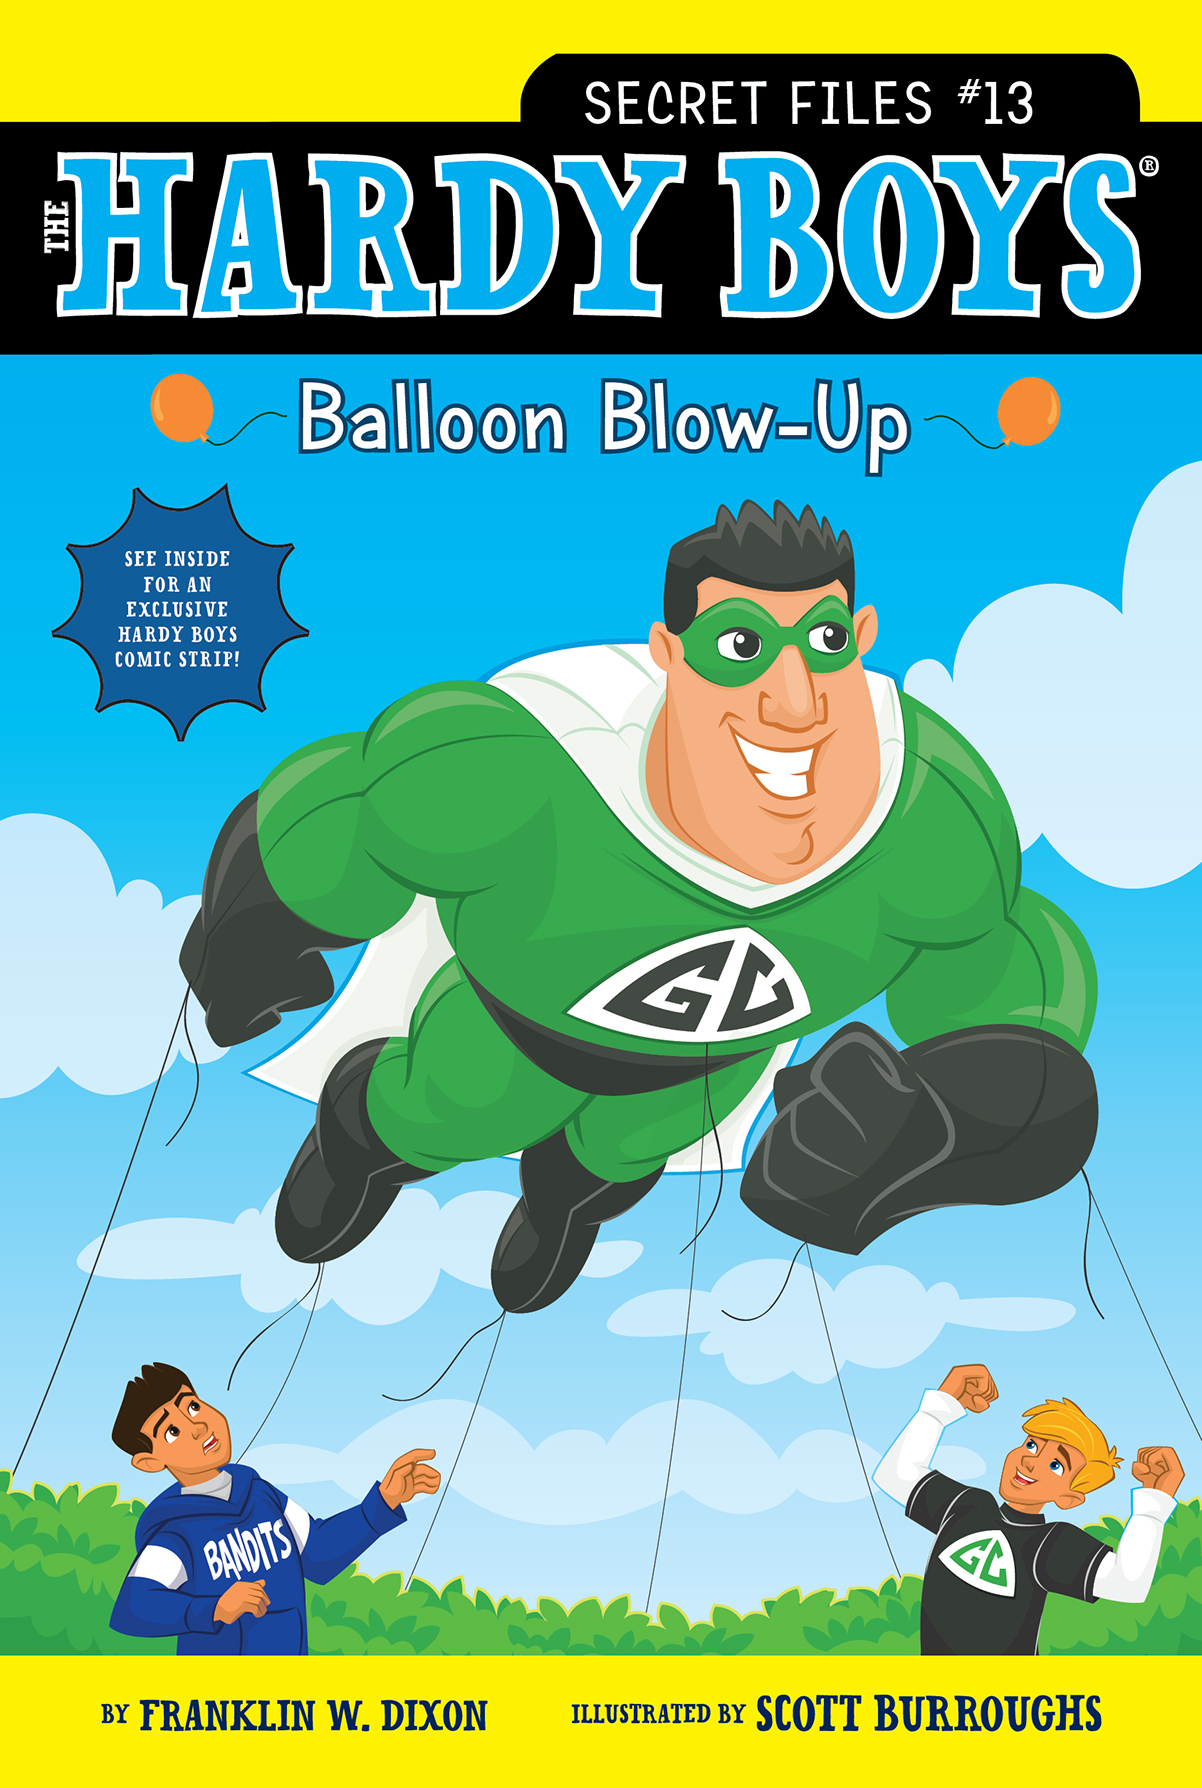 Balloon Blow-Up